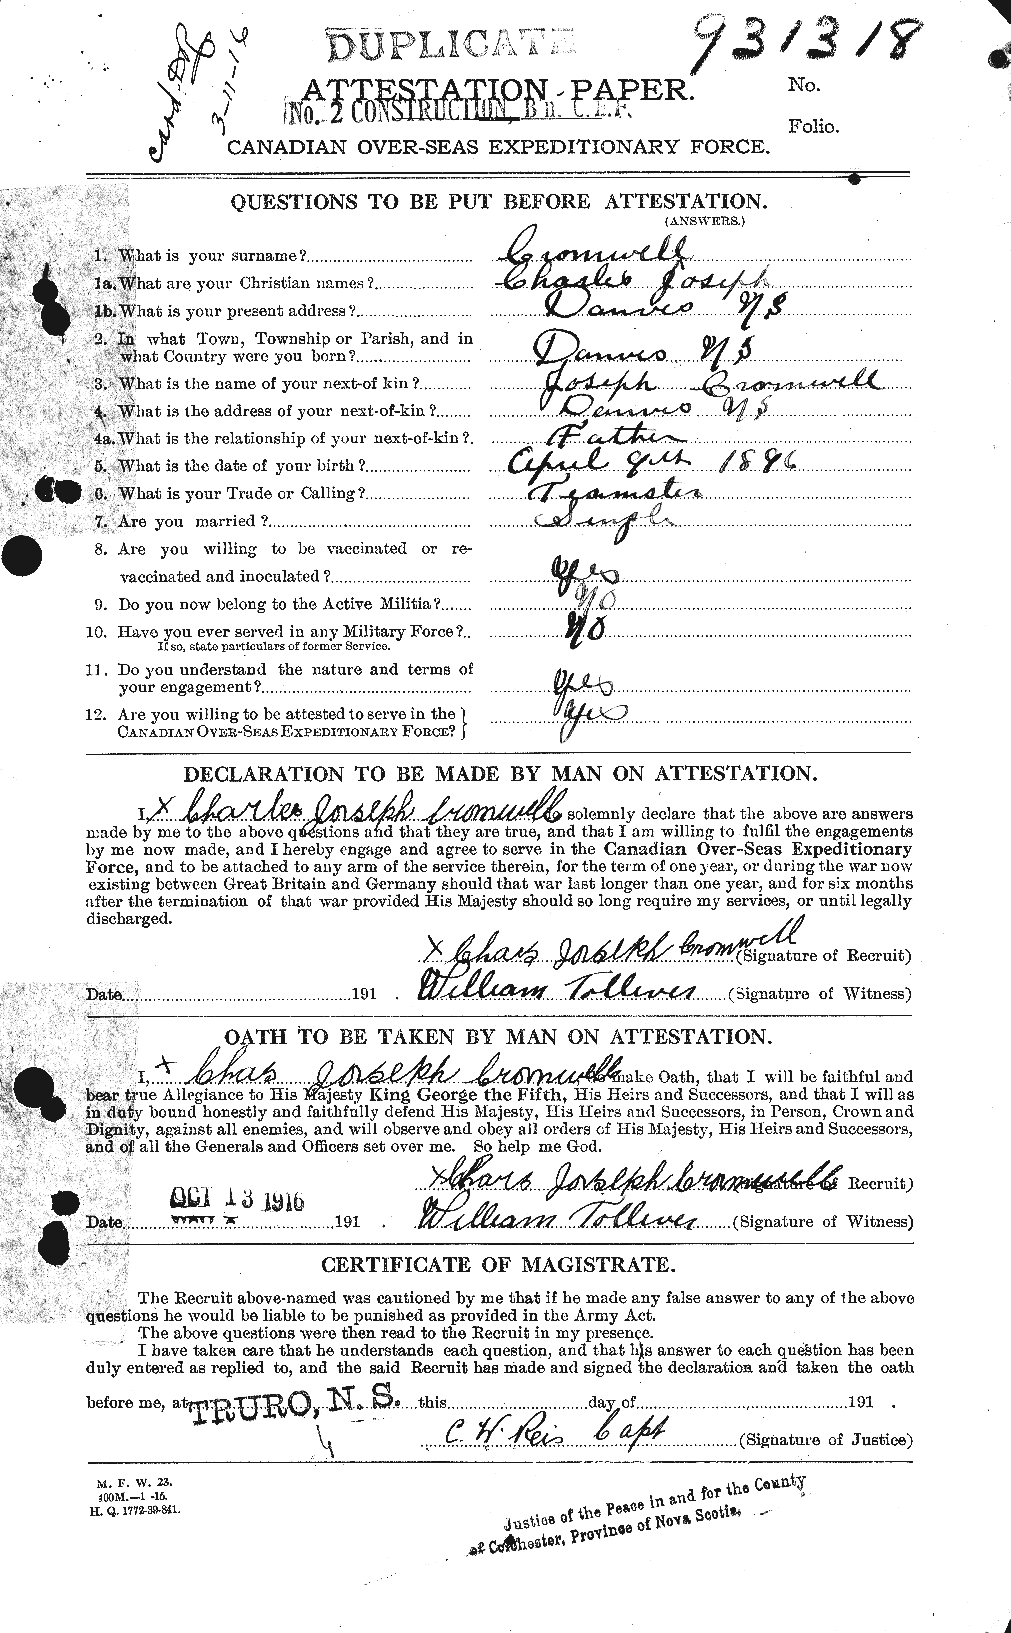 Personnel Records of the First World War - CEF 064933a